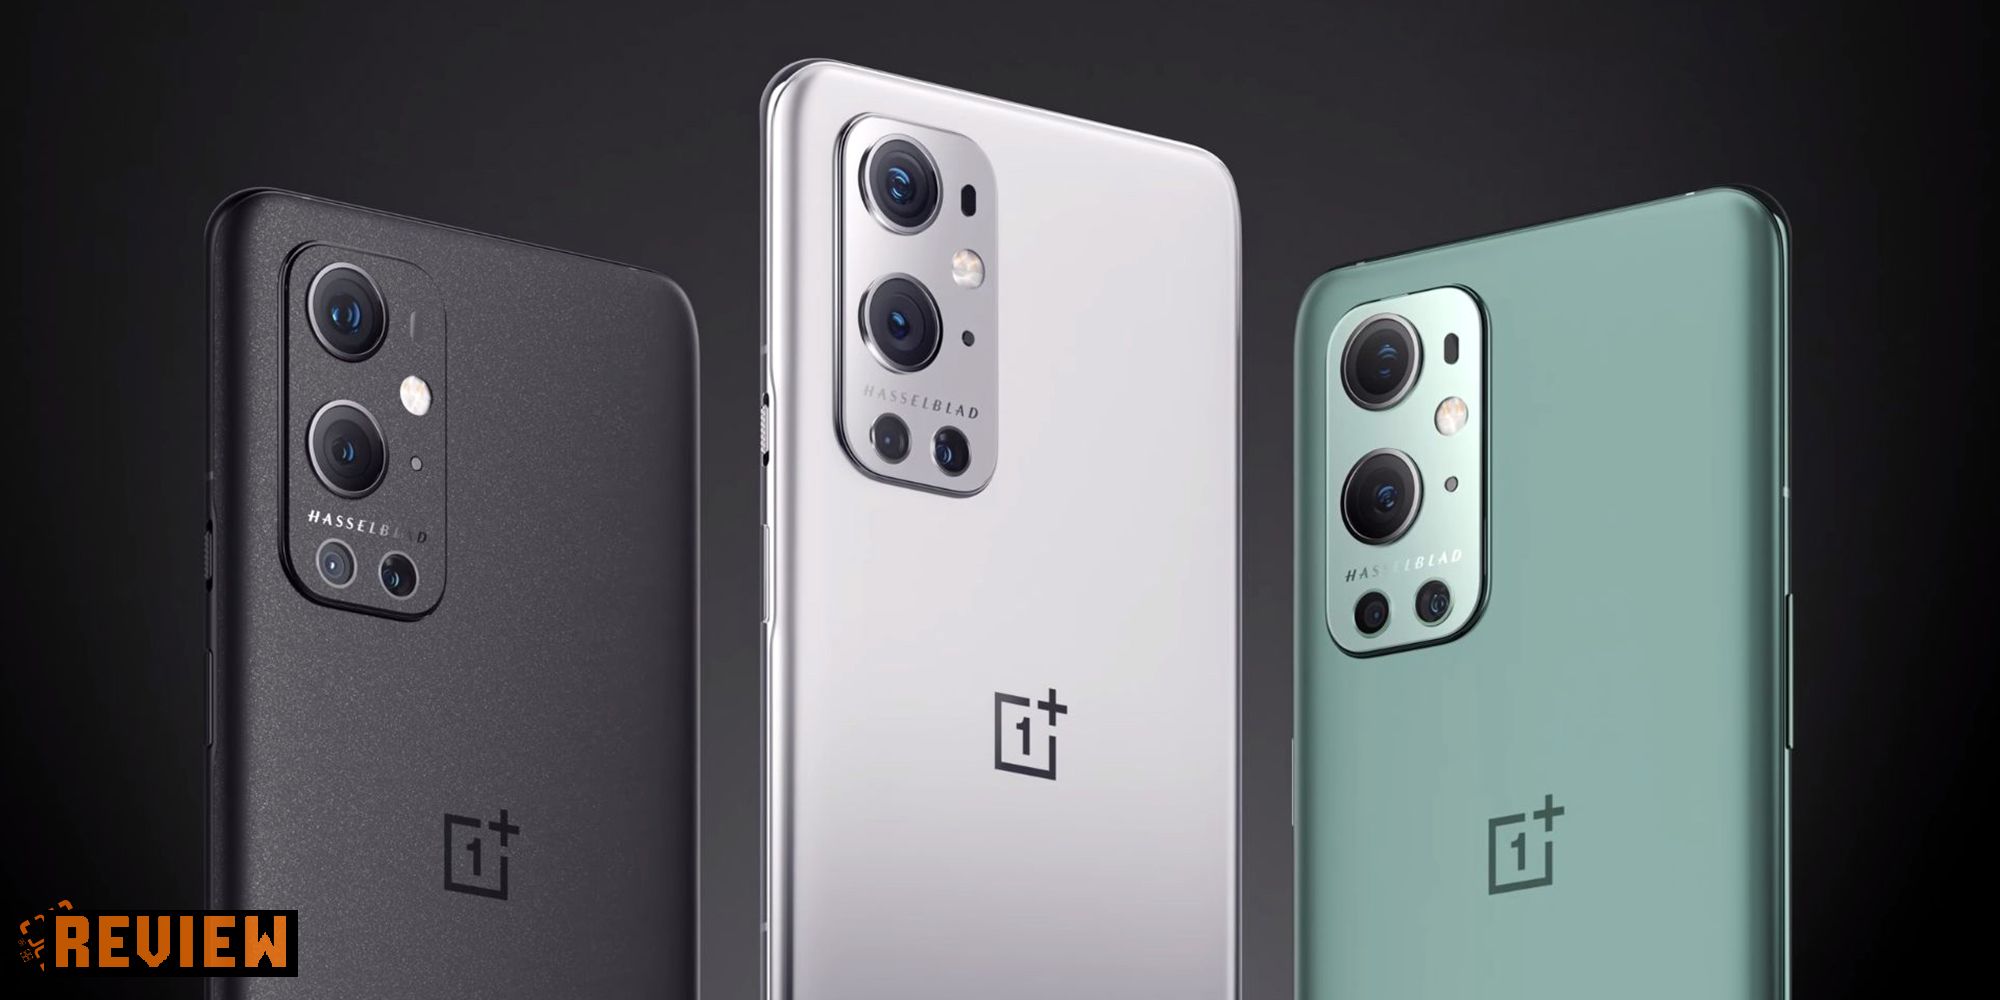 Product image of OnePlus 9 Pro 5G phones.